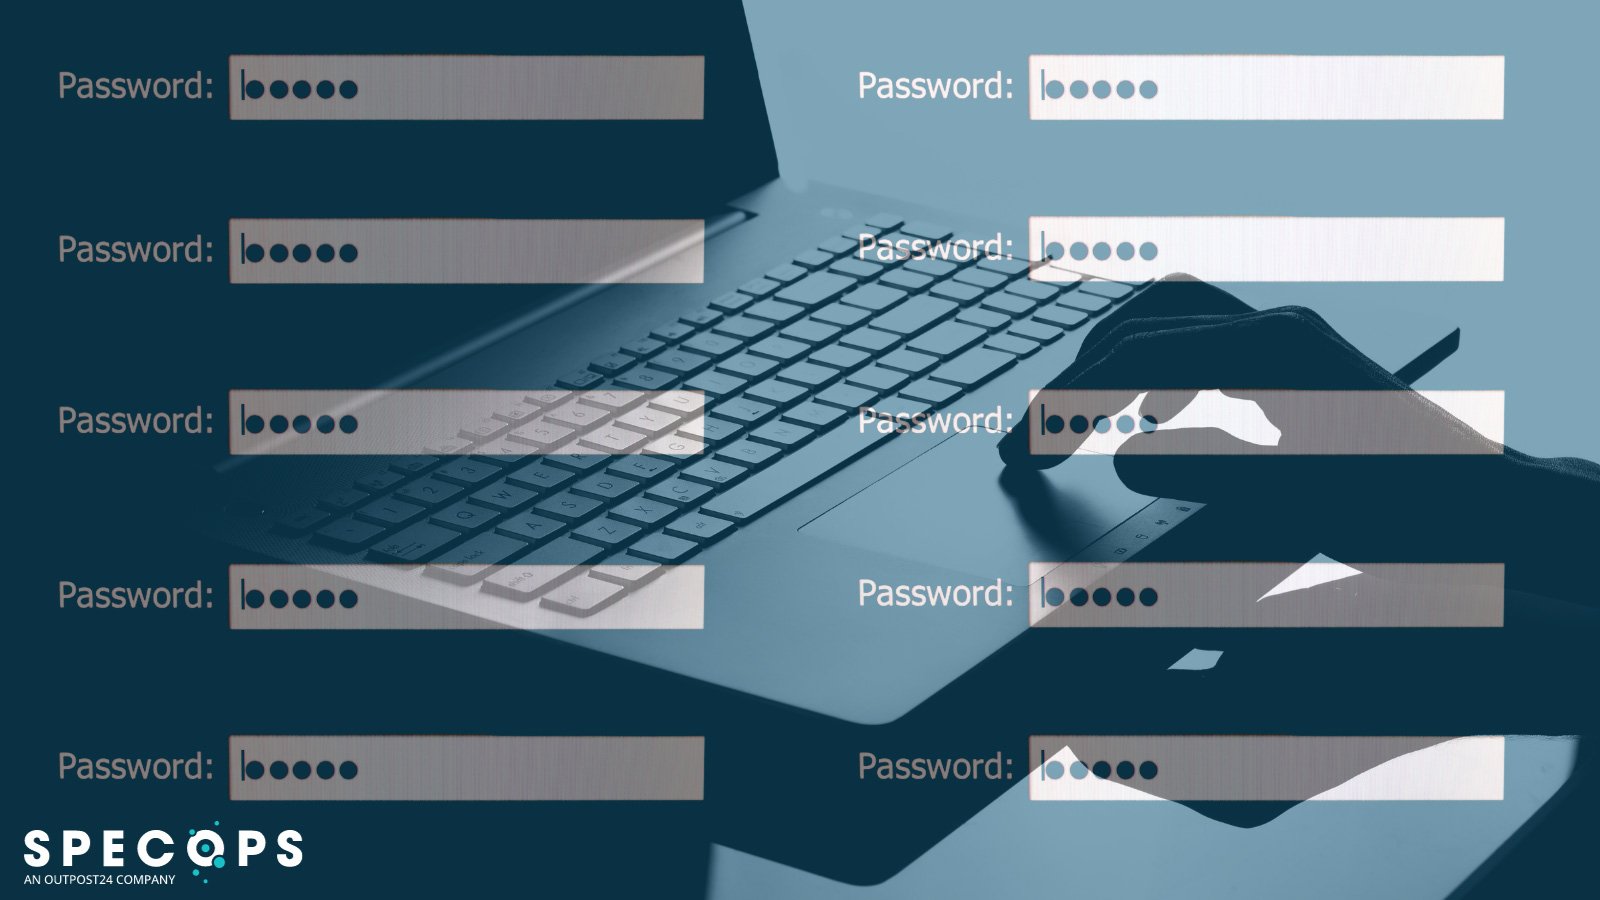 Your end-users are reusing passwords – that’s a big problem